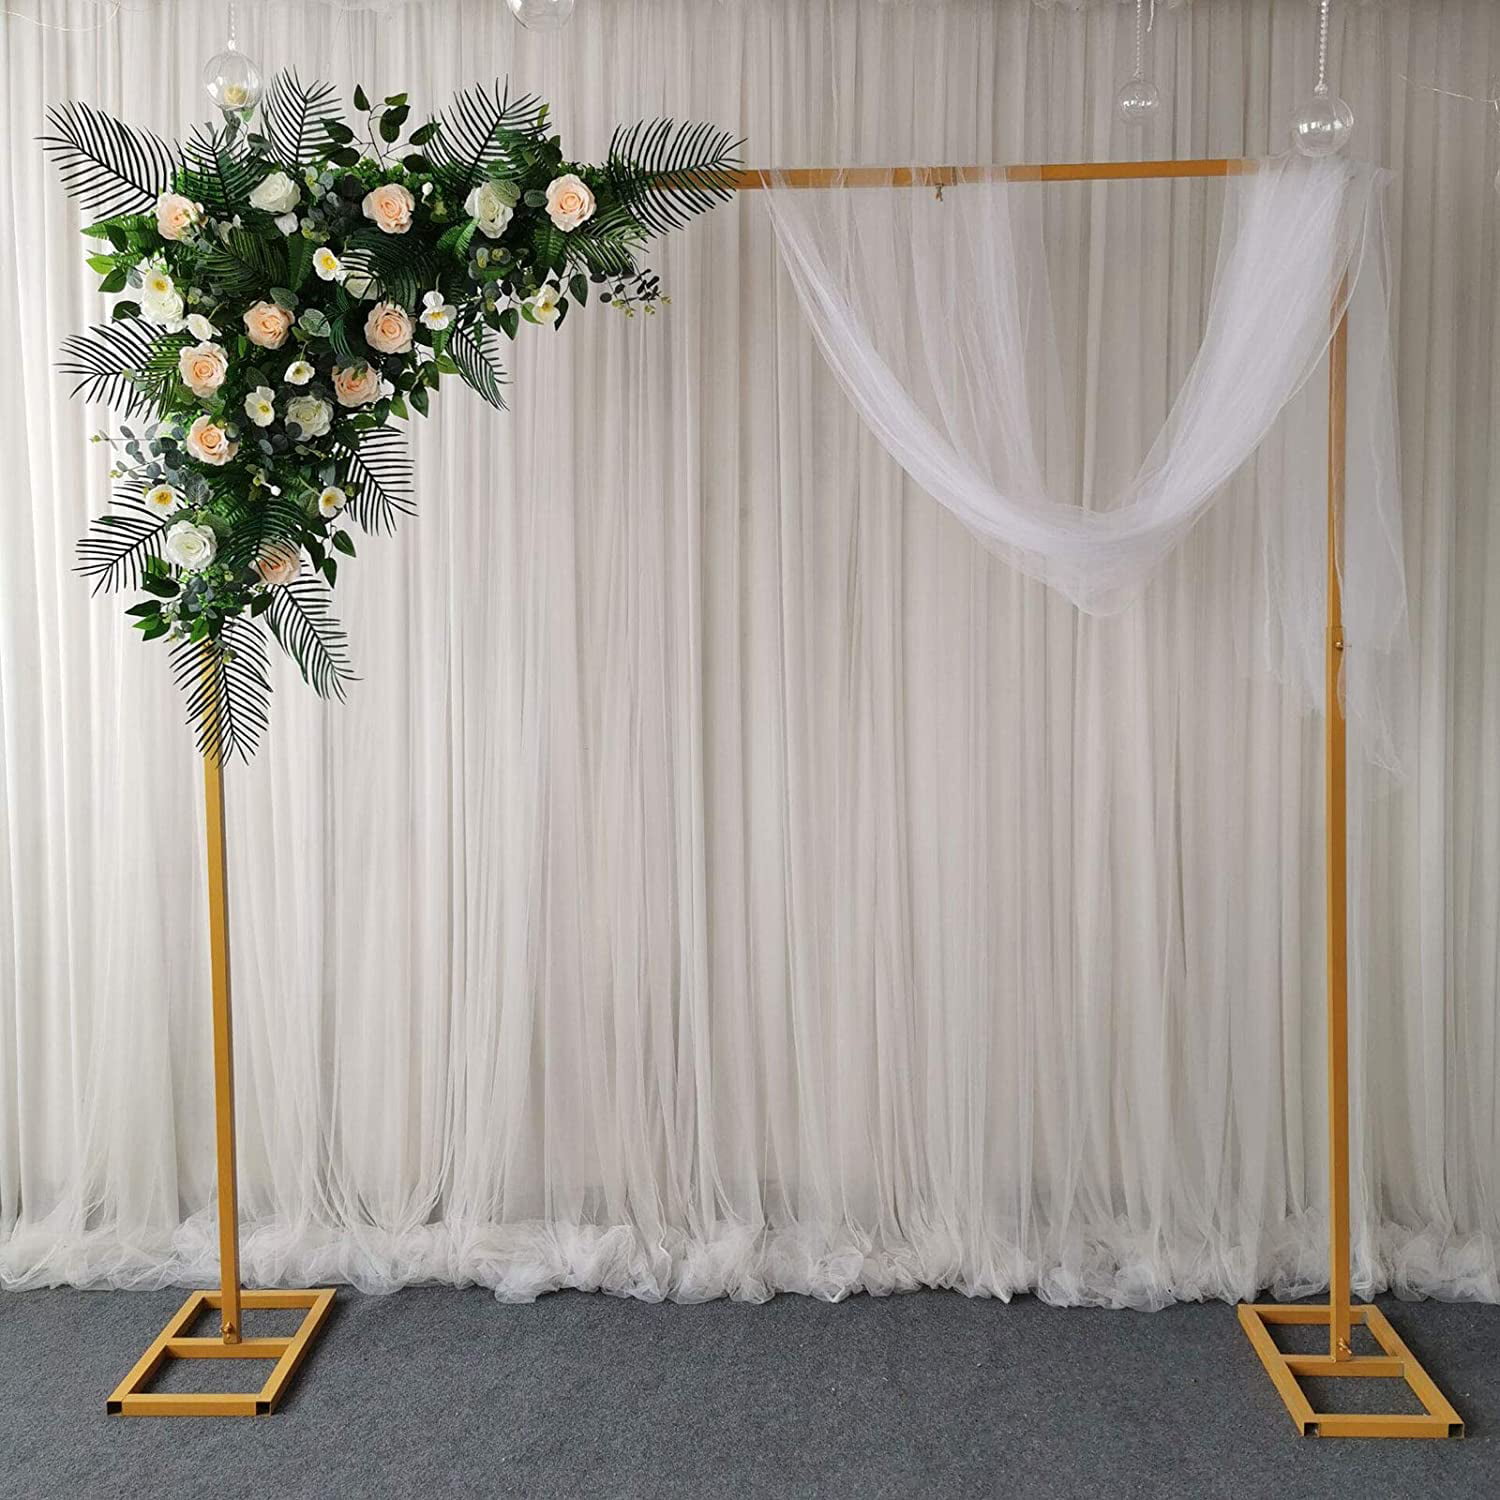 7.2 x 4.8 Feet Wedding Arch Square Garden Arch Metal Abor Gold Backdrop Stand Easy Assembly Balloon Arch for Bridal Birthday Party Decoration Wedding Arches for Ceremony 